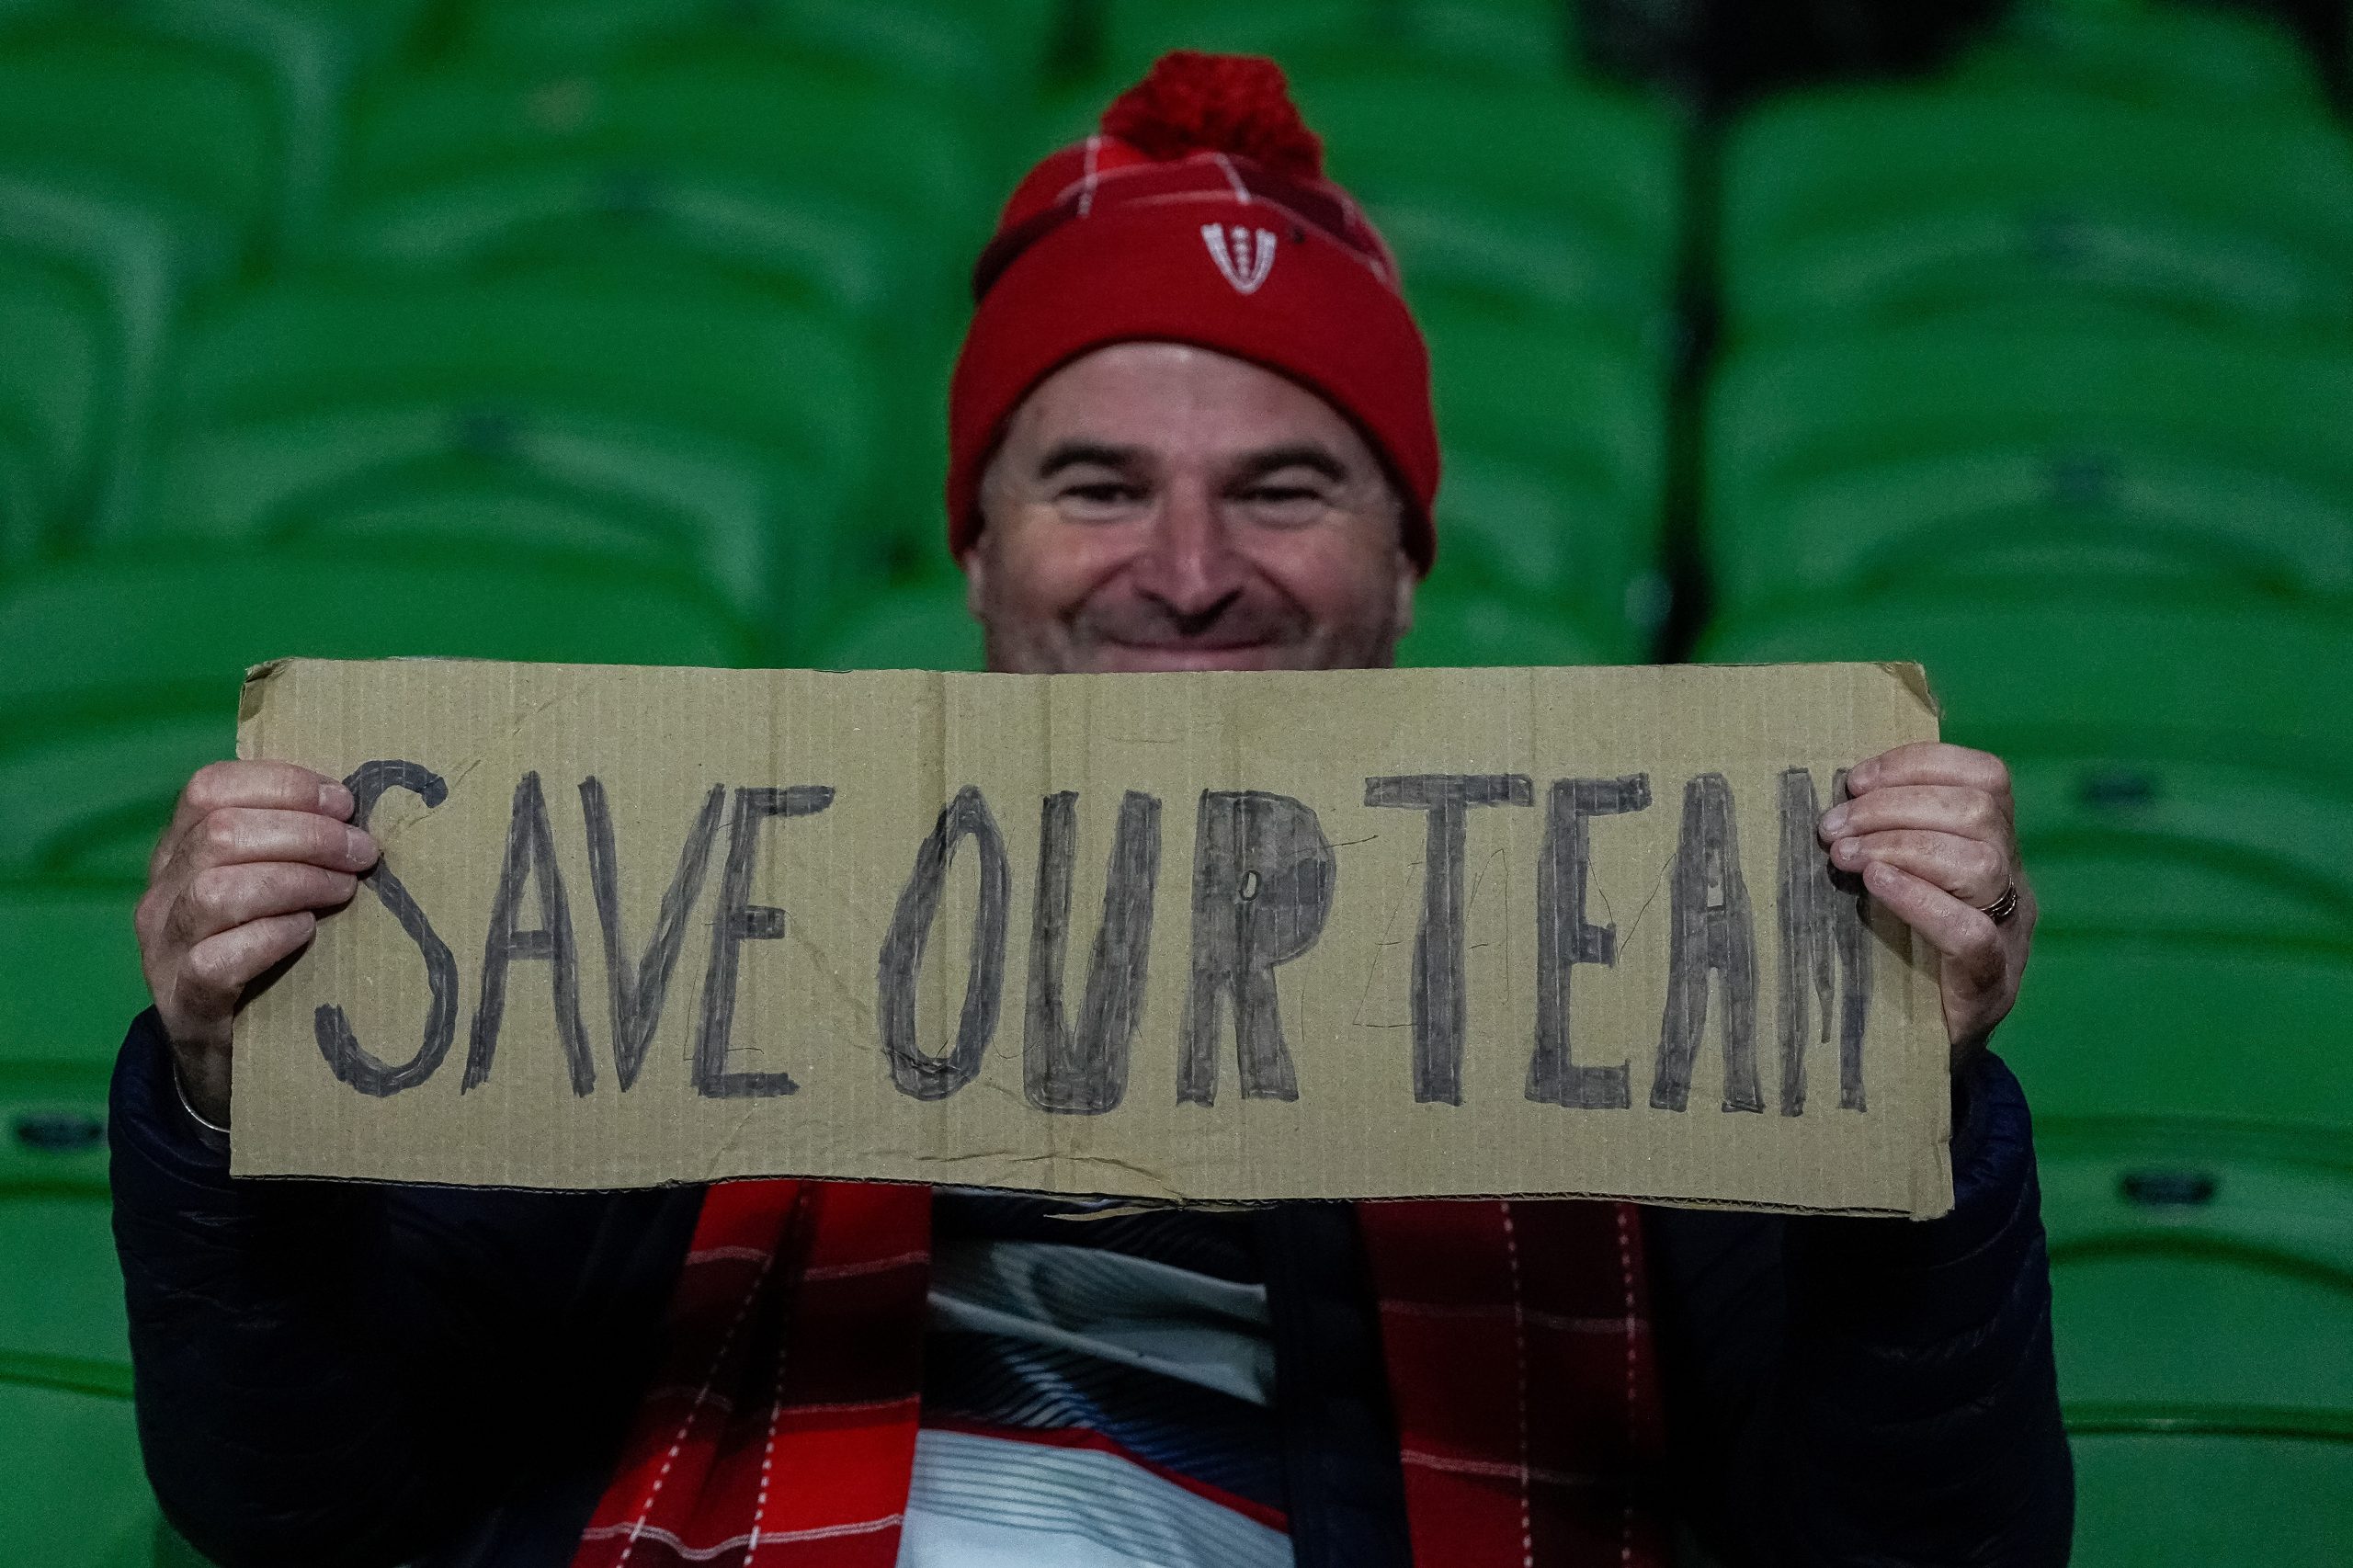 A Melbourne Rebels supporter holds up a sign reading 'Save our team'.